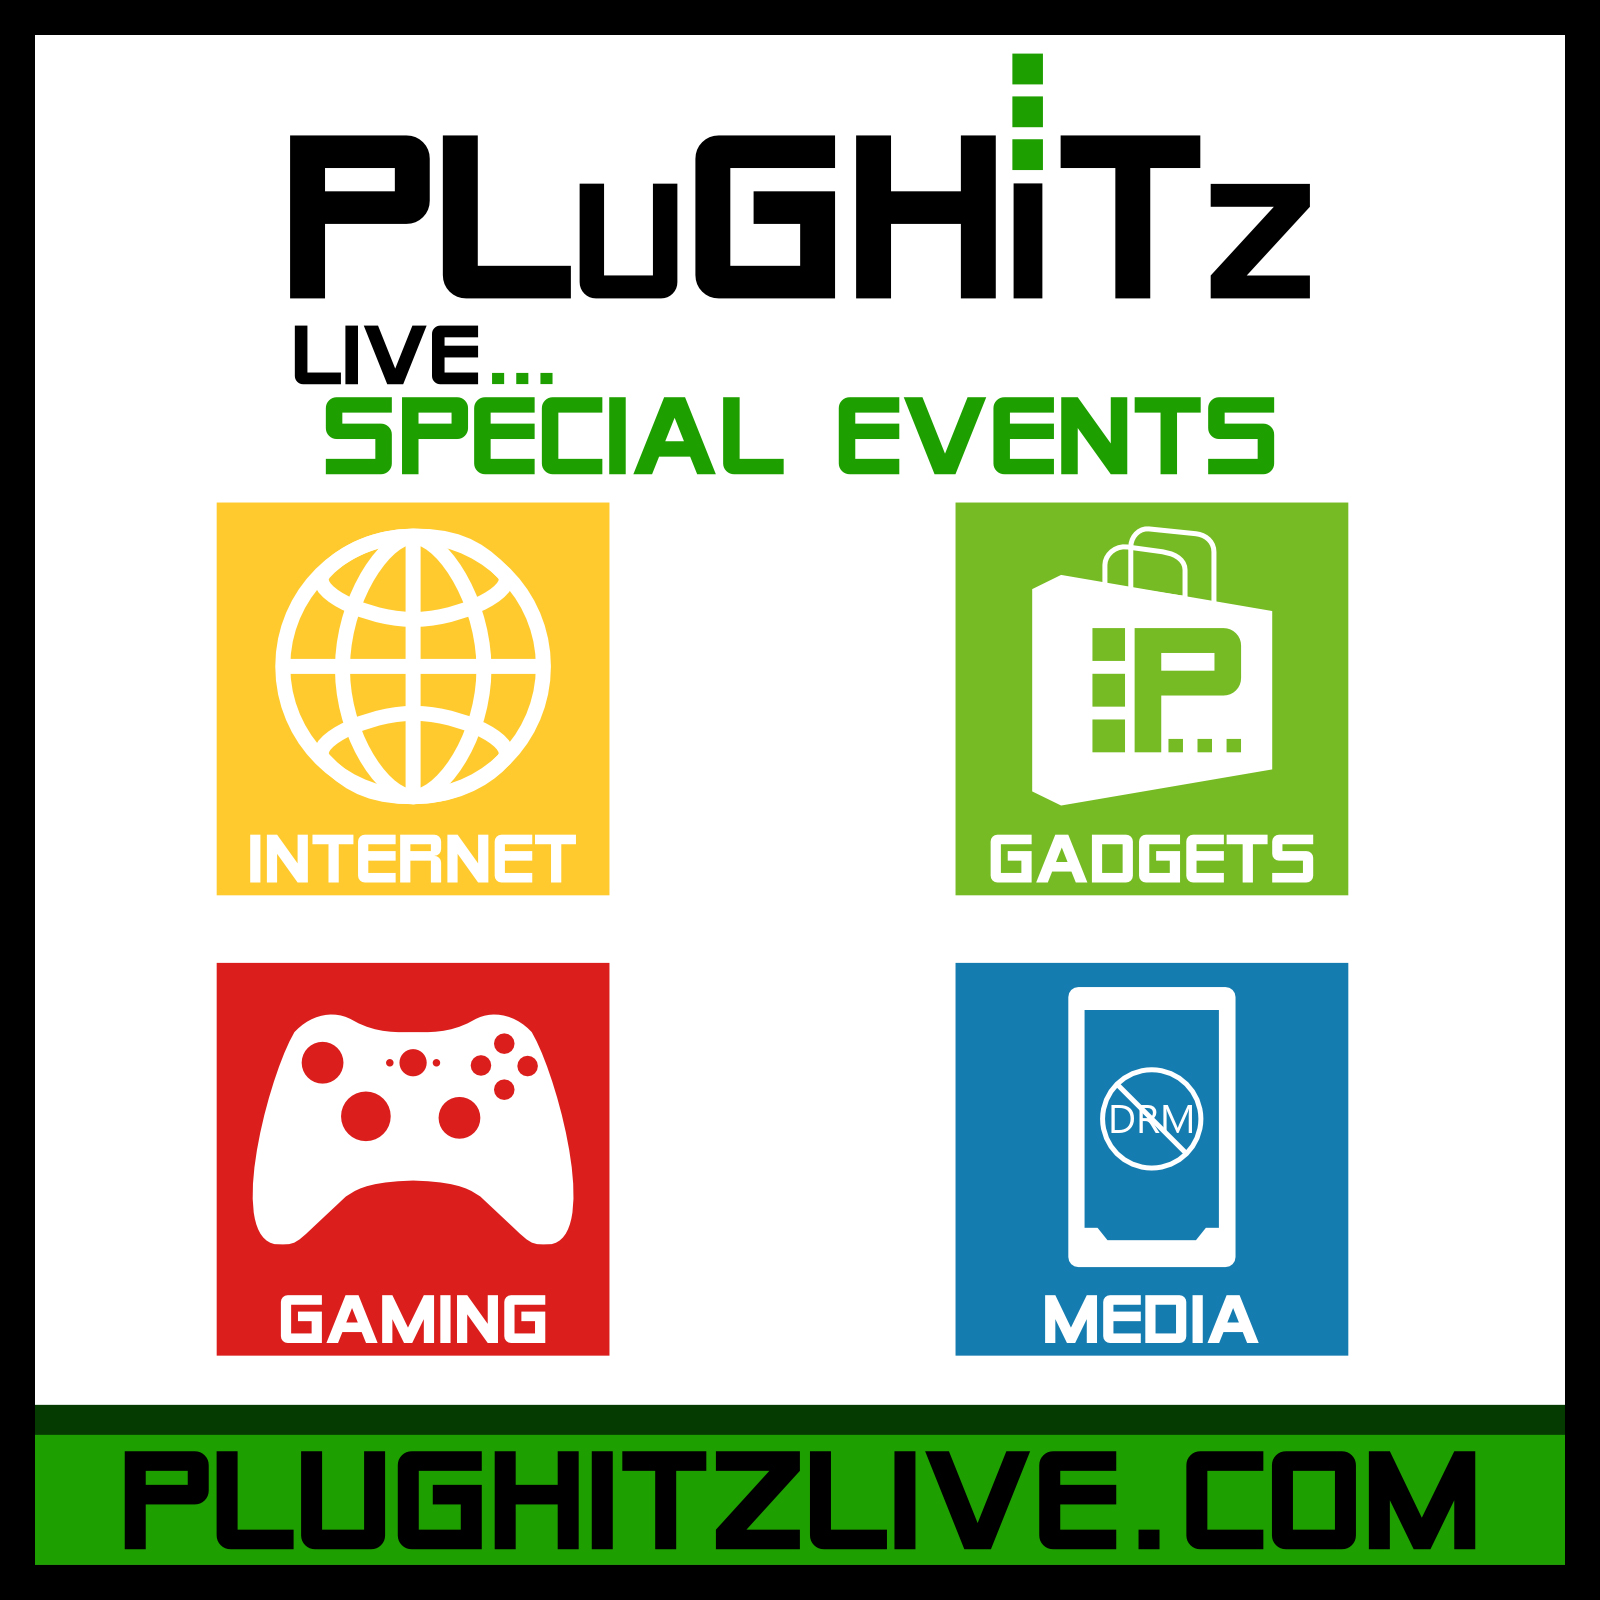 Living in Digital Times - Real Products for Real People (PLuGHiTz Live - Special Events)